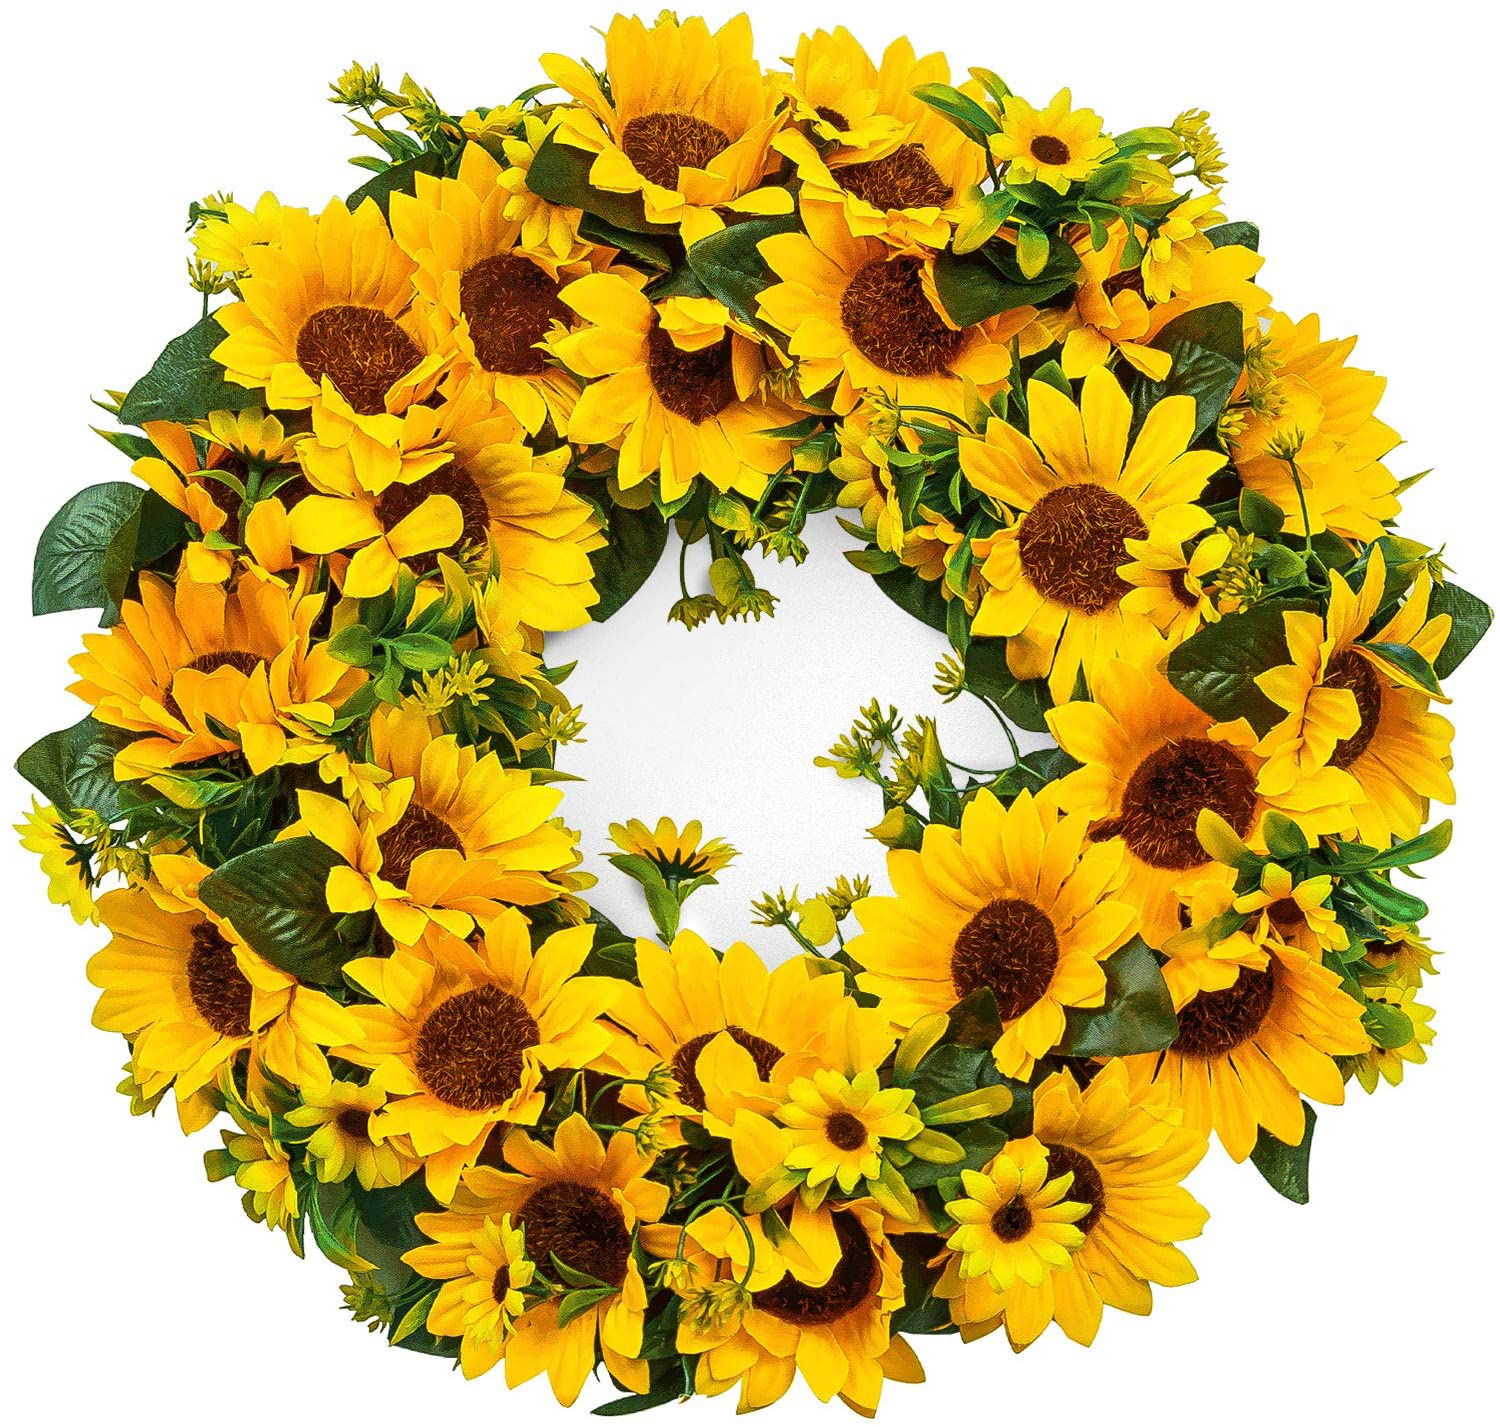 Souarts 15-16 Inch Sunflower Wreath, Artificial Yellow Sunflower Summer Wreath, Front Door Wreath for Indoor Outdoor, Home Office Wall Wedding Holiday Decor Summer Wreath